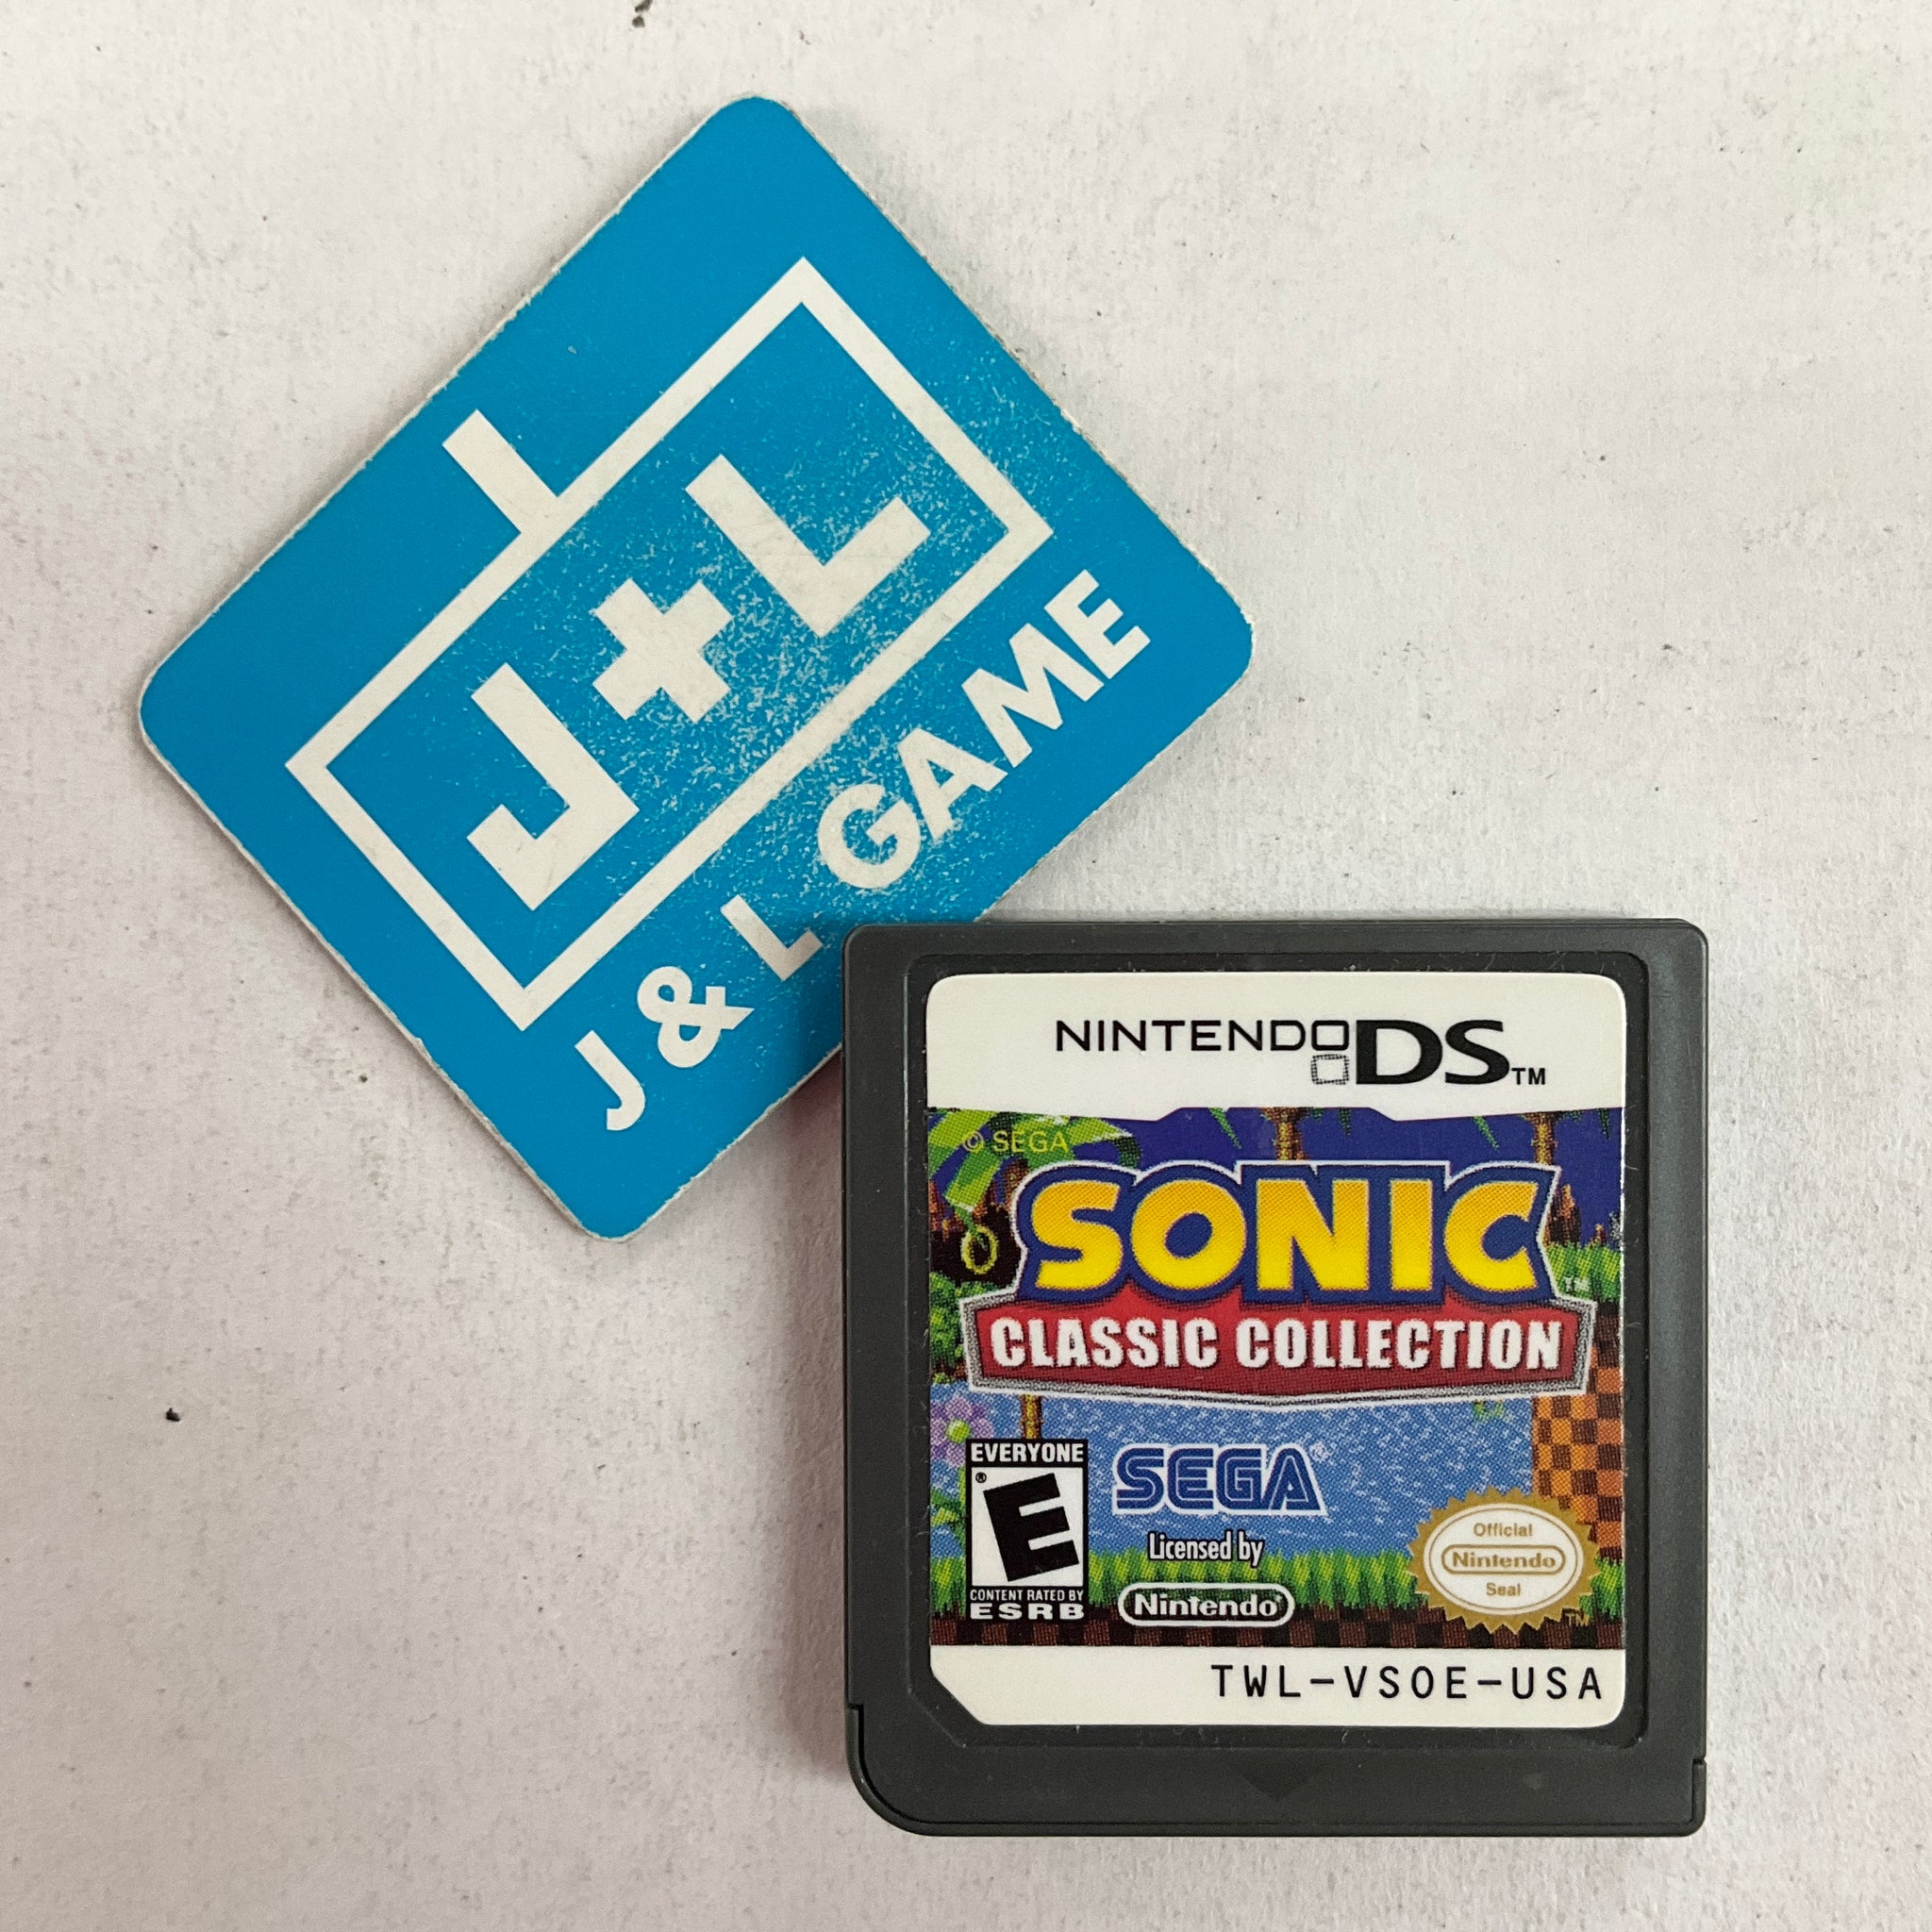 Sonic Classic Collection - Nintendo DS, Nintendo DS